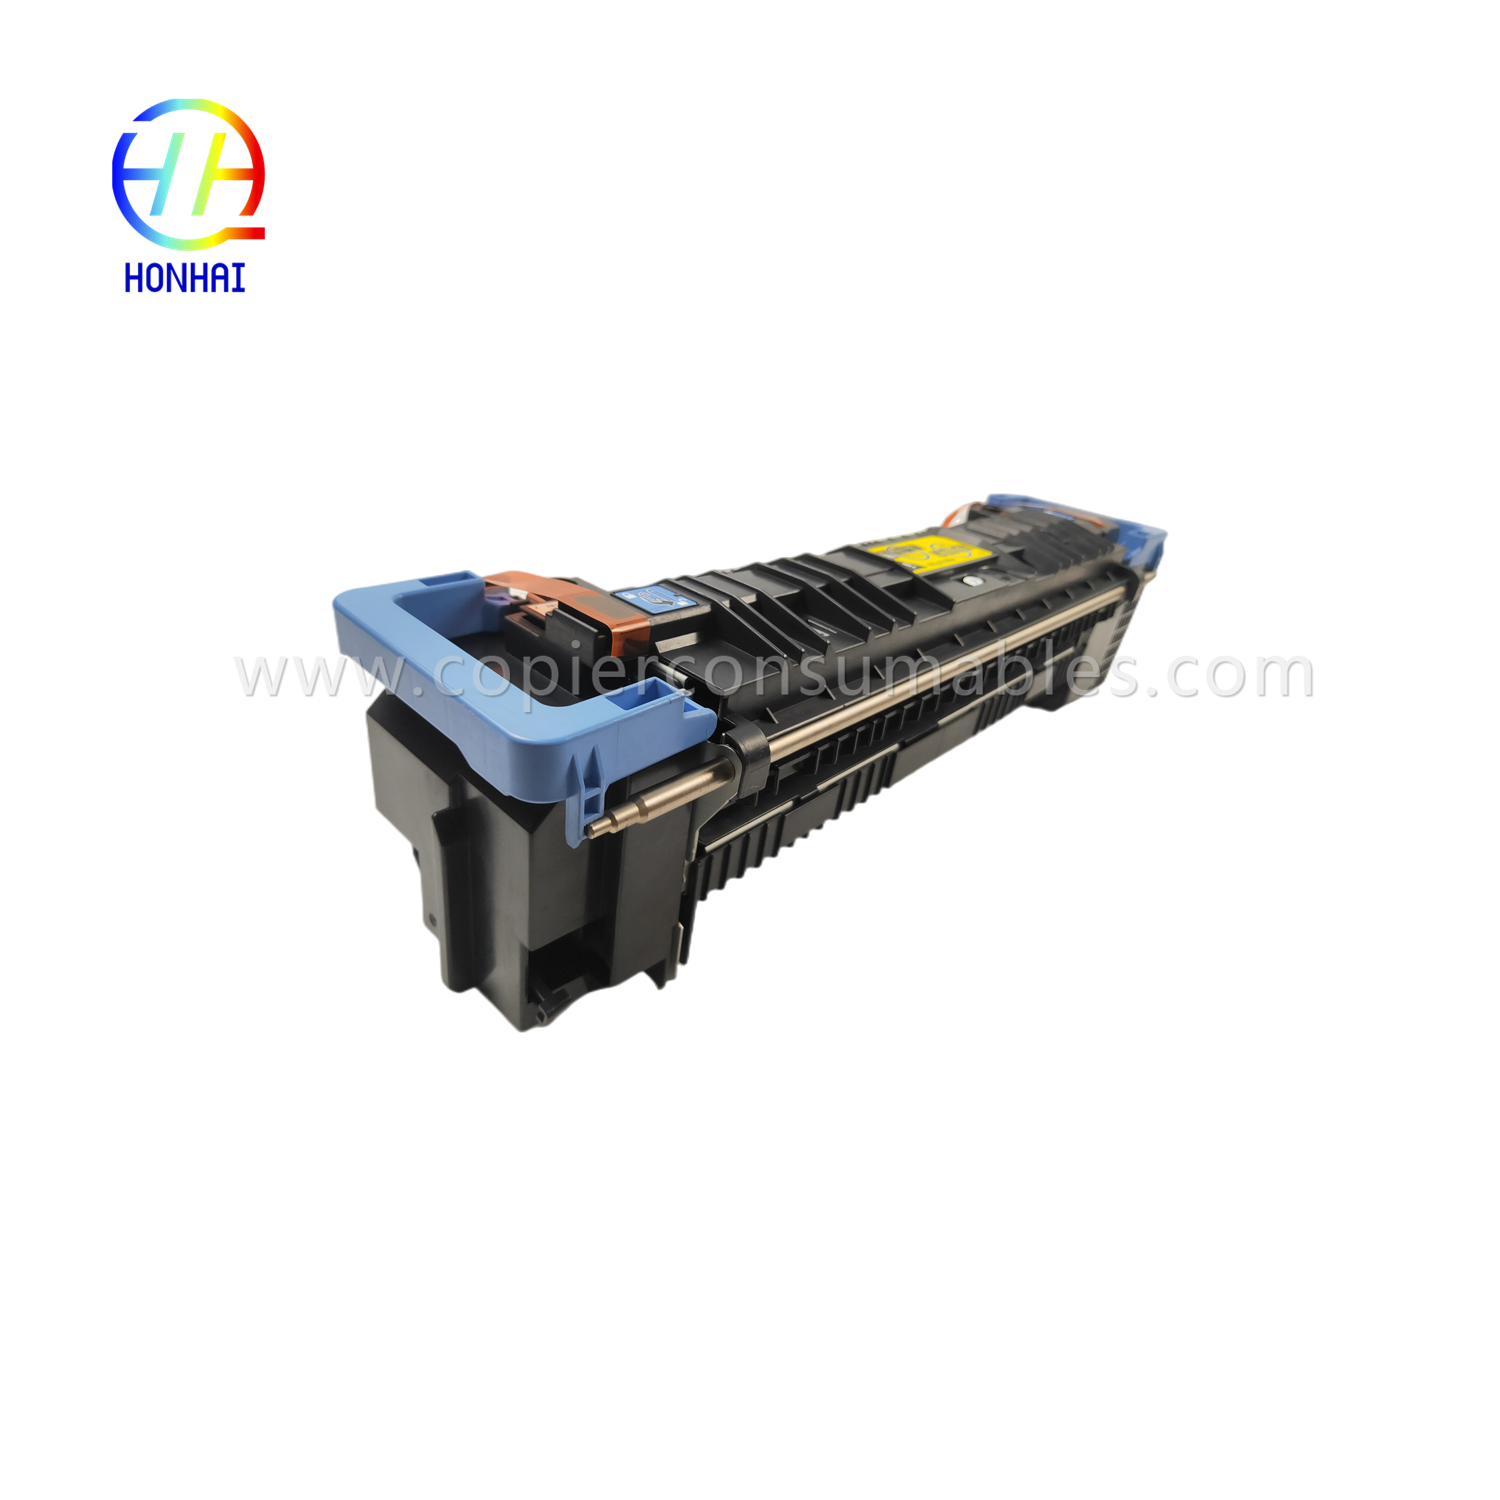 https://www.copierconsumables.com/fuser-assembly-unit-for-hp-m855-m880-m855dn-m855xh-m880z-m880z-c1n54-67901-c1n58-67901-fusing-assyduct-product